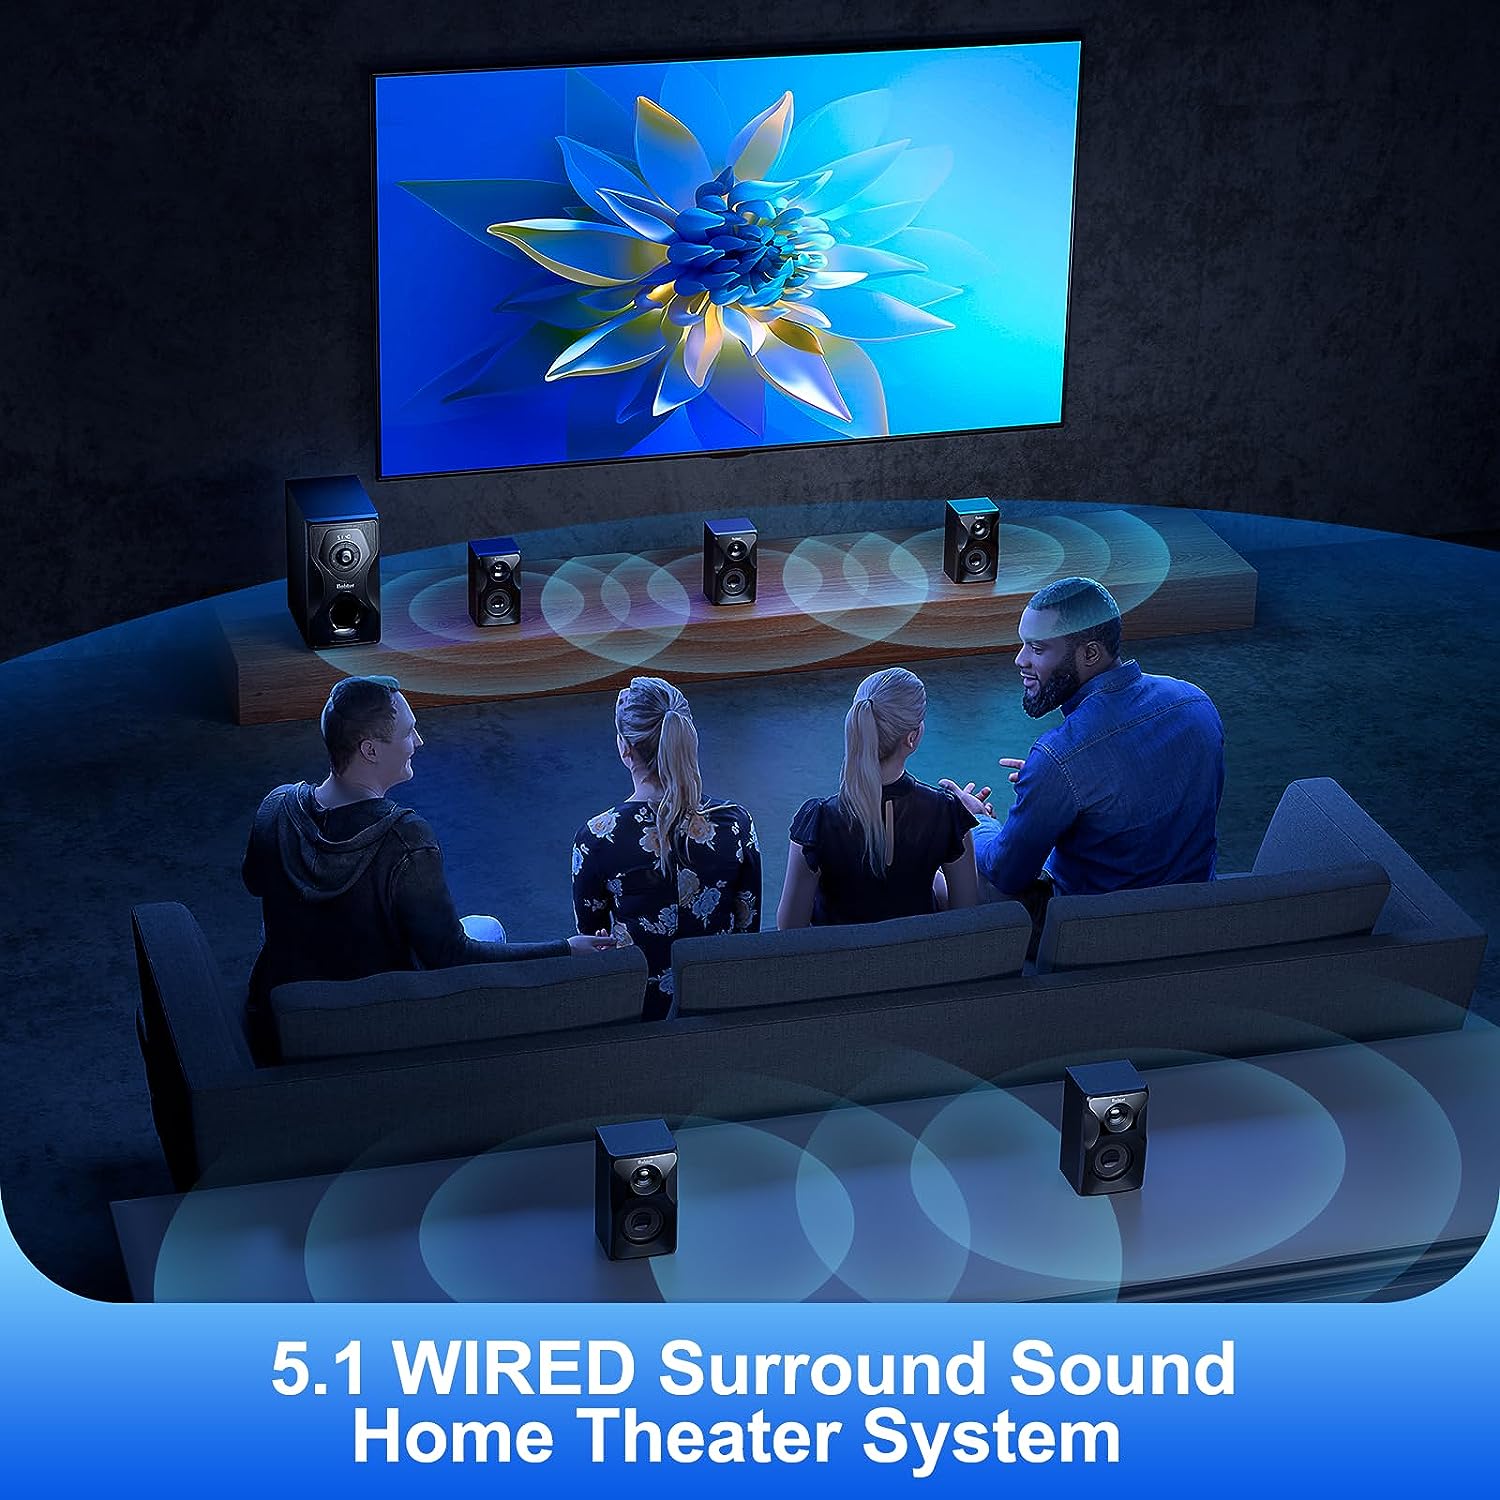 Bobtot Surround Sound Speakers Home Theater Systems - 700 Watts Peak Power 5.1/2.1 Stereo Bluetooth Speaker System 5.25 Subwoofer Strong Bass with HDMI ARC Optical Input